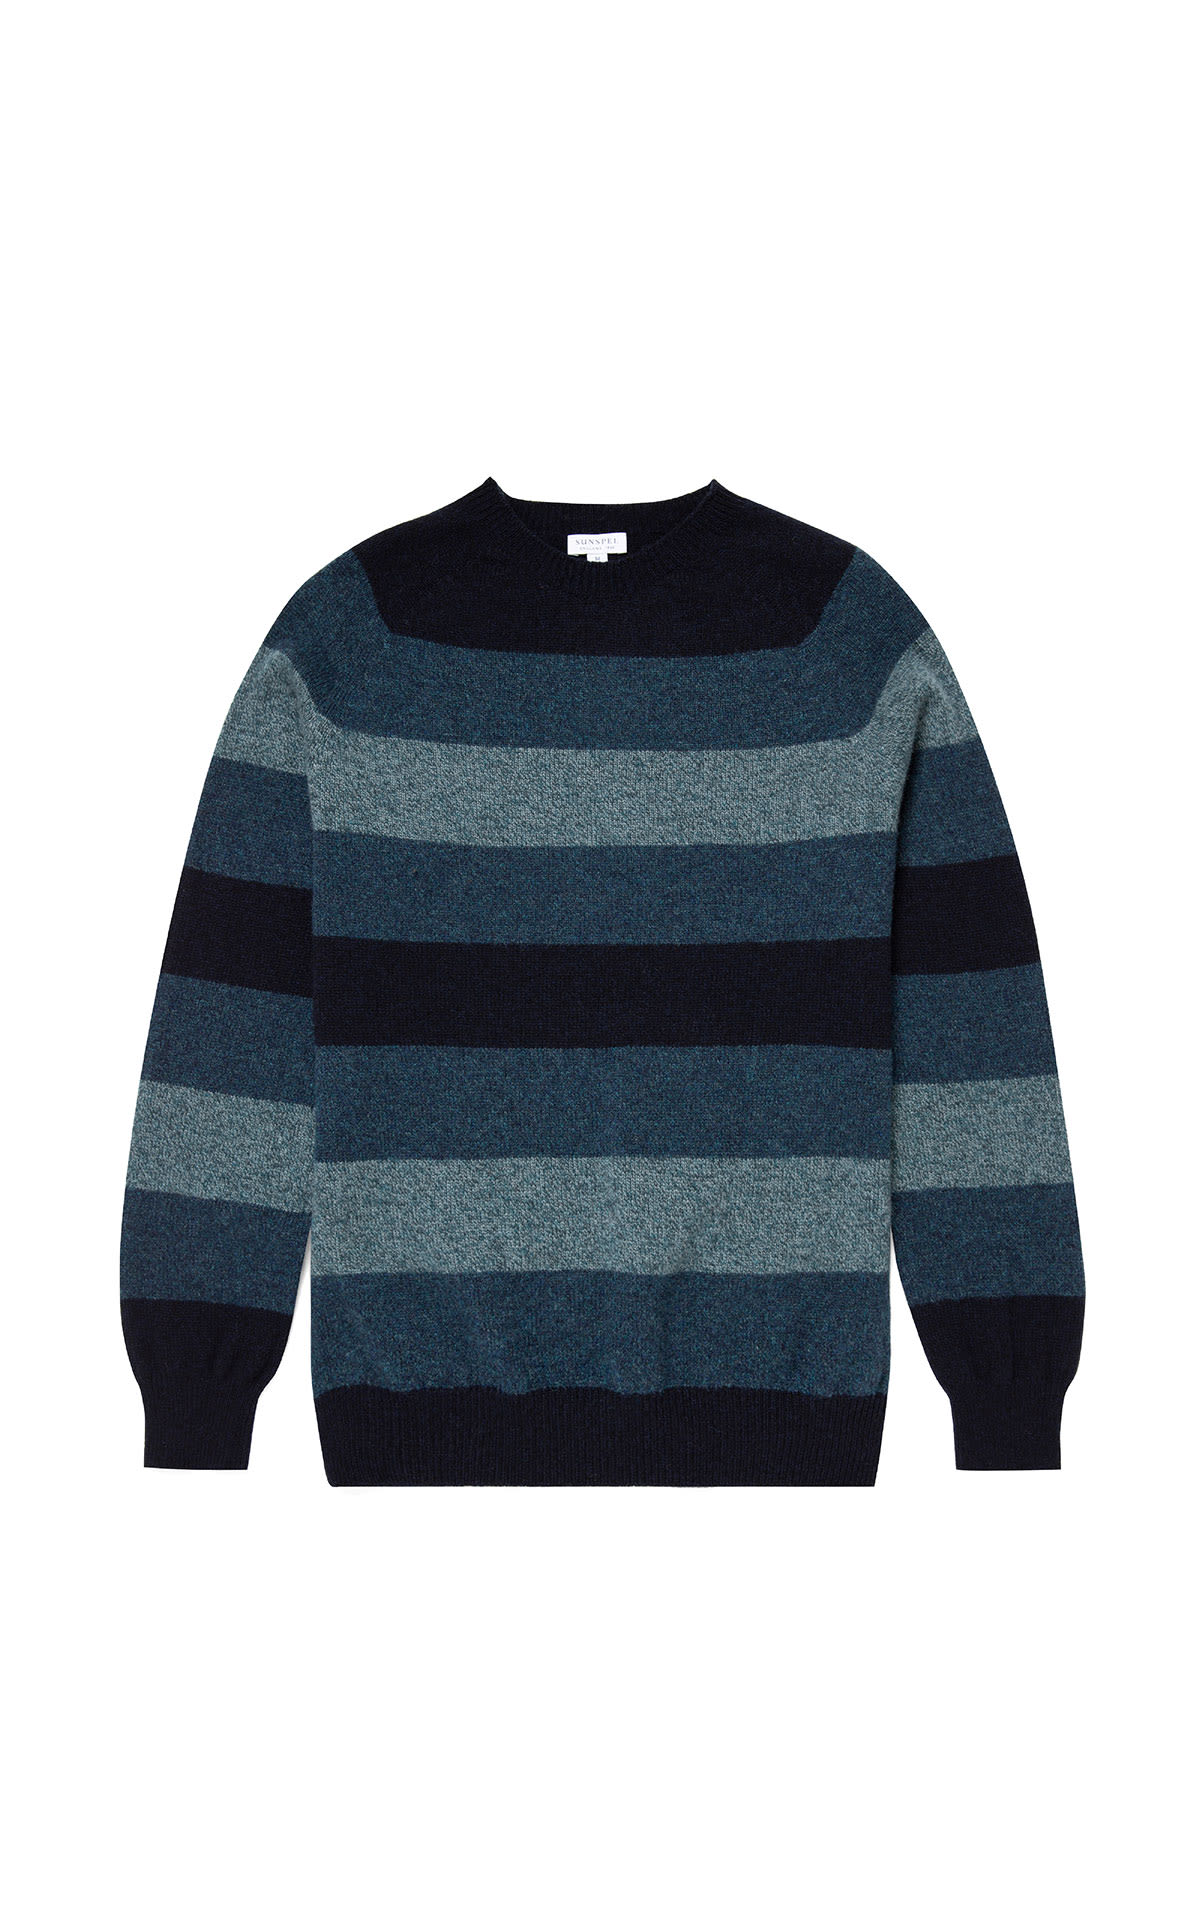 Sunspel Lambswool crew neck jumper in petrol and grey block stripe from Bicester Village